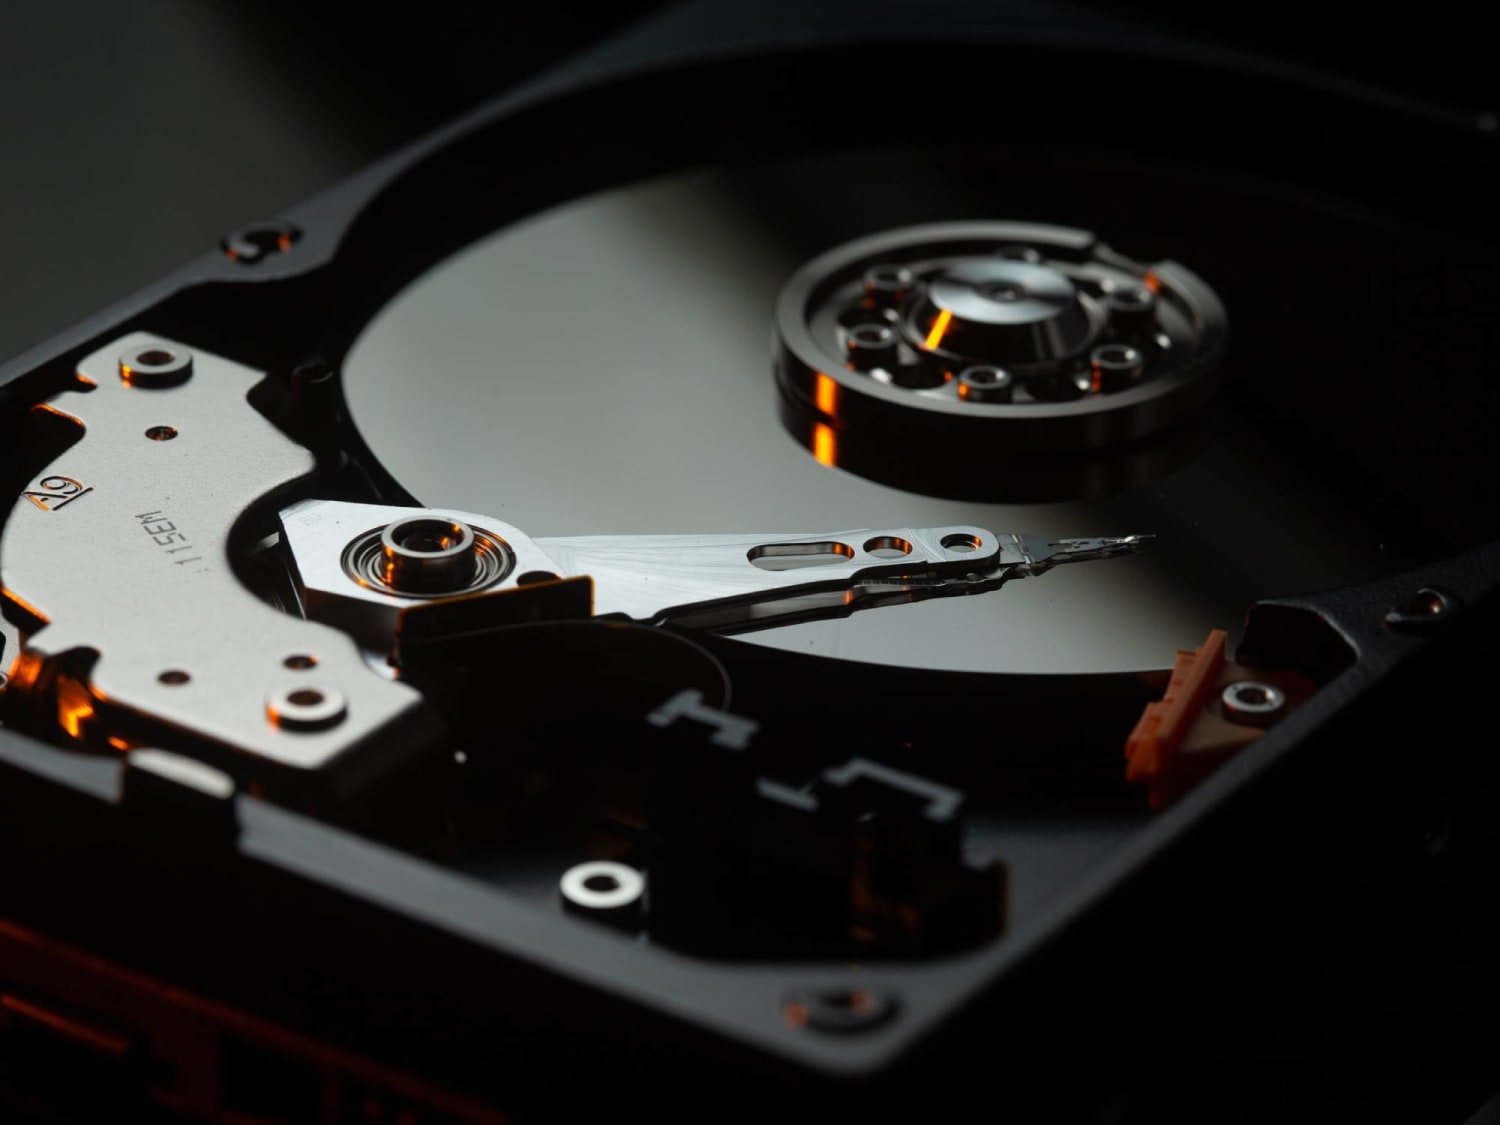 Did your hard drive crash? Here’s how to know if it’s safe to use again.